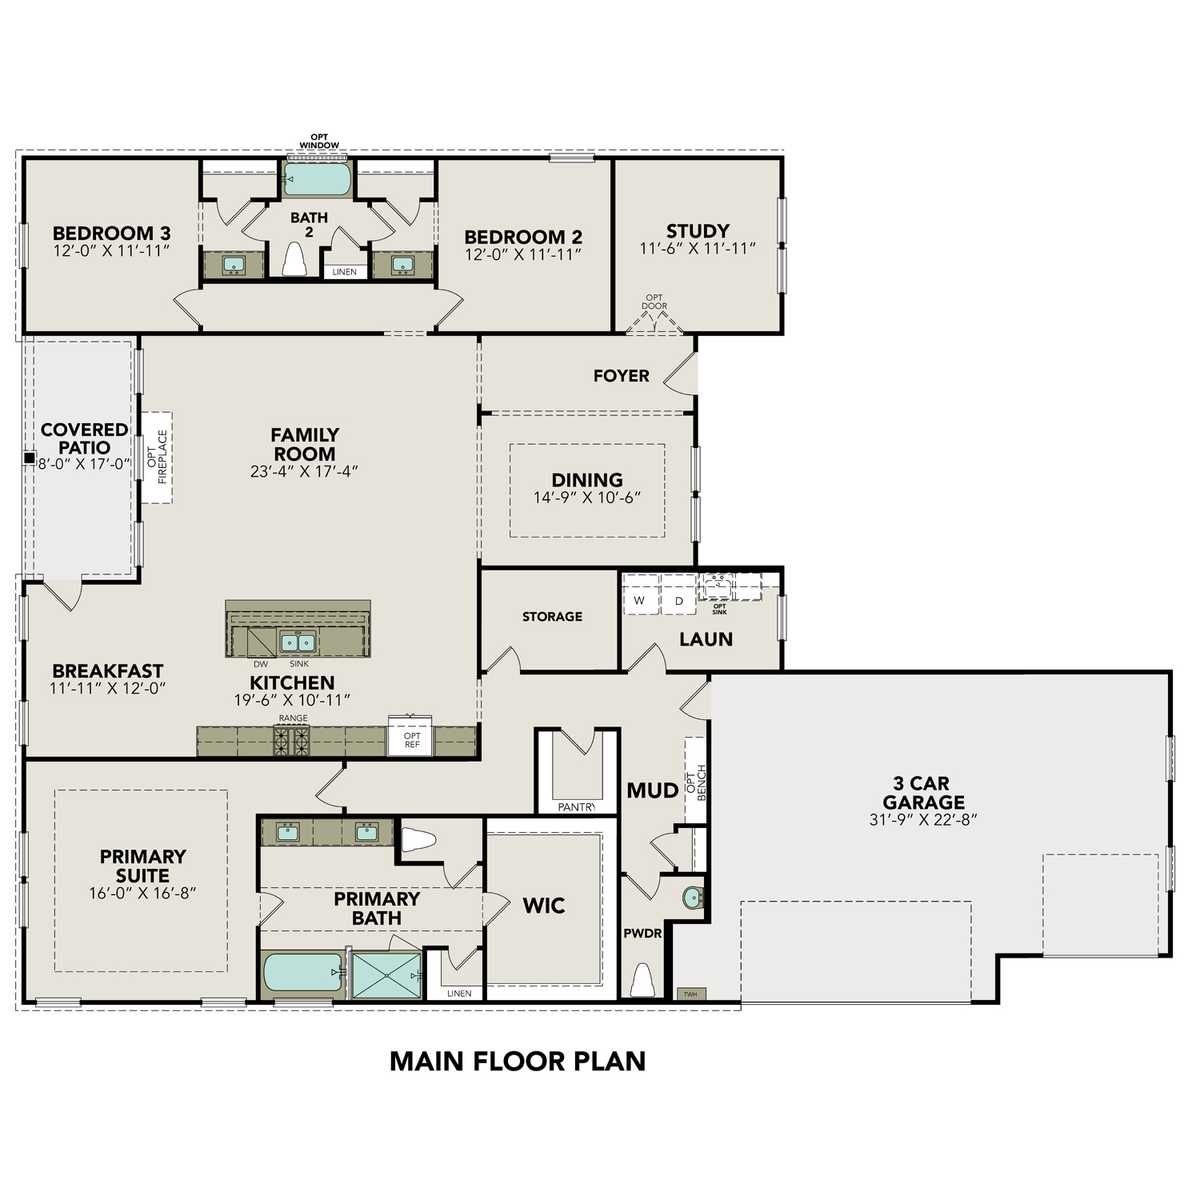 1 - The Foster D floor plan layout for 147 Matthew Path in Davidson Homes' Potranco Oaks community.